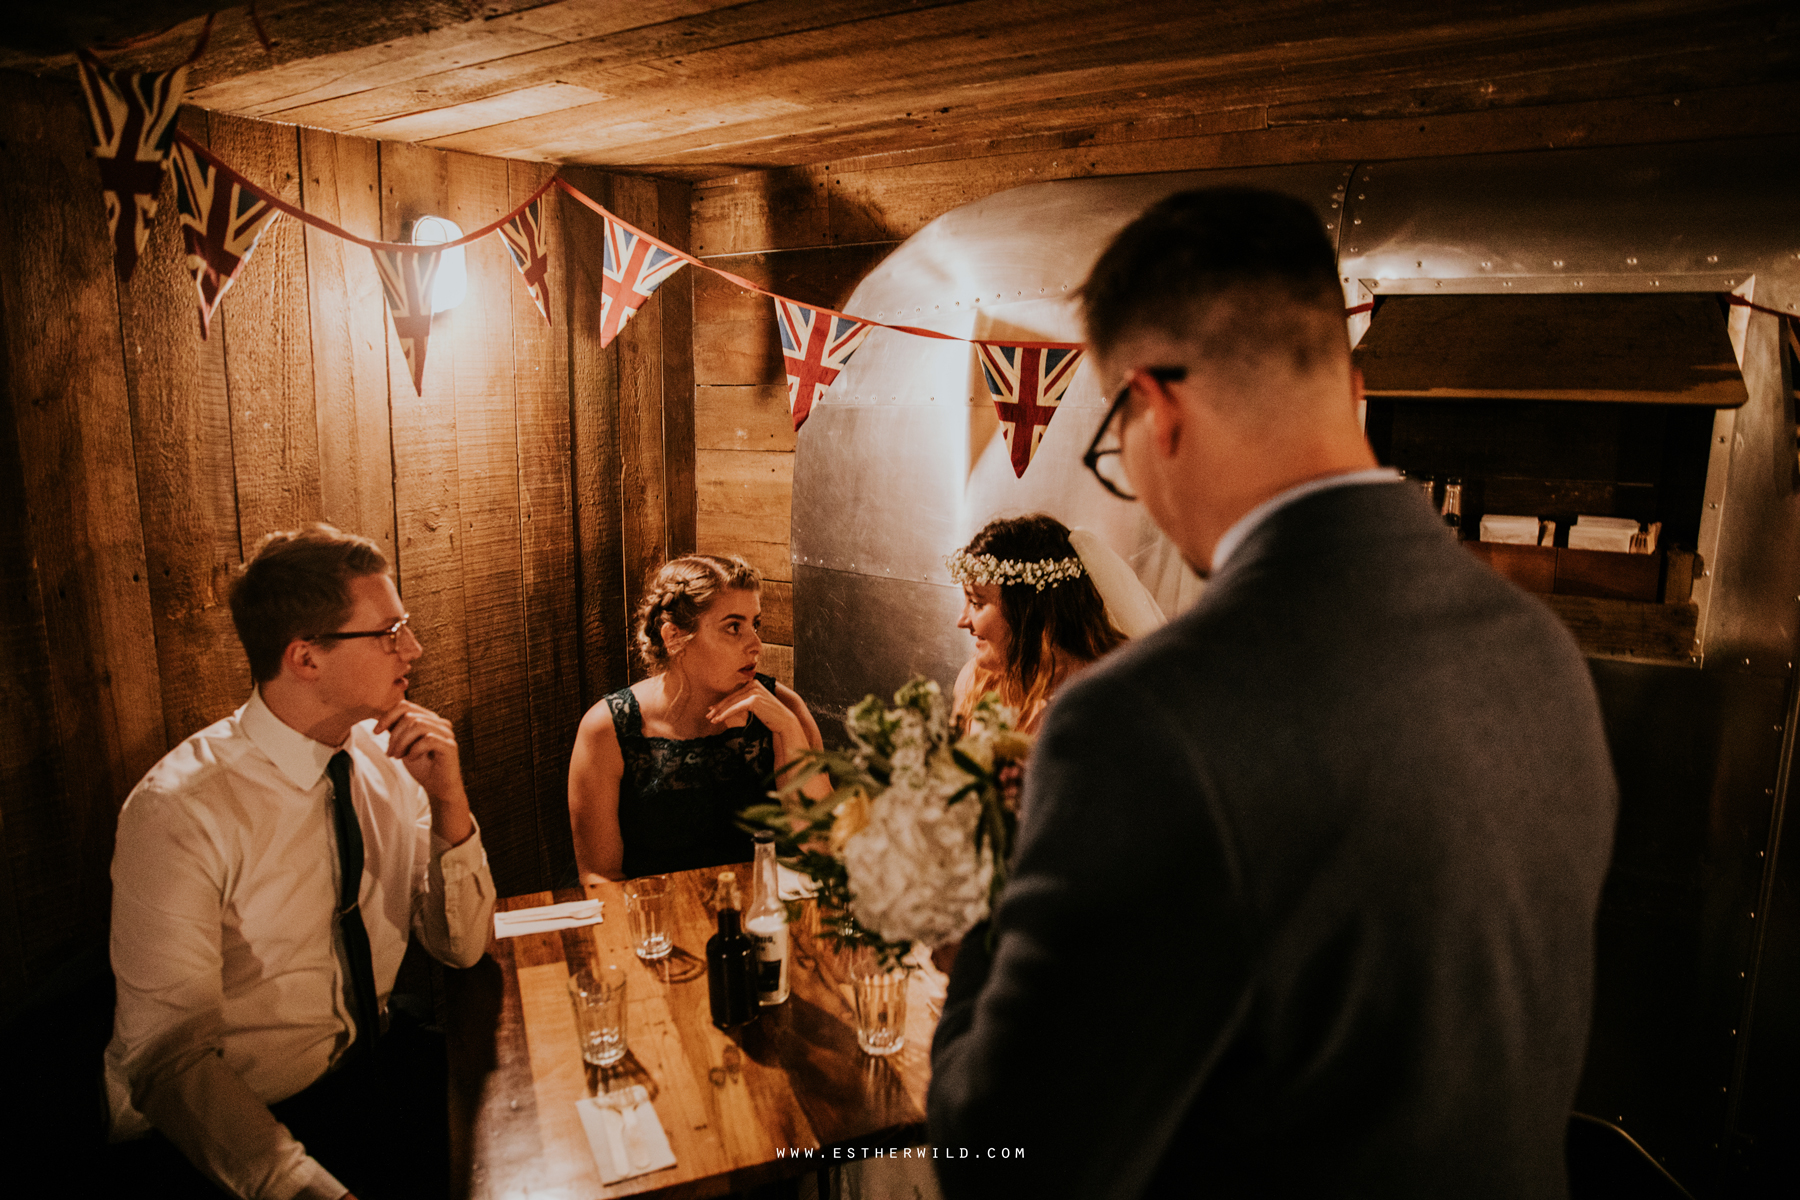 Norwich_Castle_Arcade_Grosvenor_Chip_Birdcage_Cathedral_Cloisters_Refectory_Wedding_Photography_Esther_Wild_Photographer_Norfolk_Kings_Lynn_3R8A1385.jpg